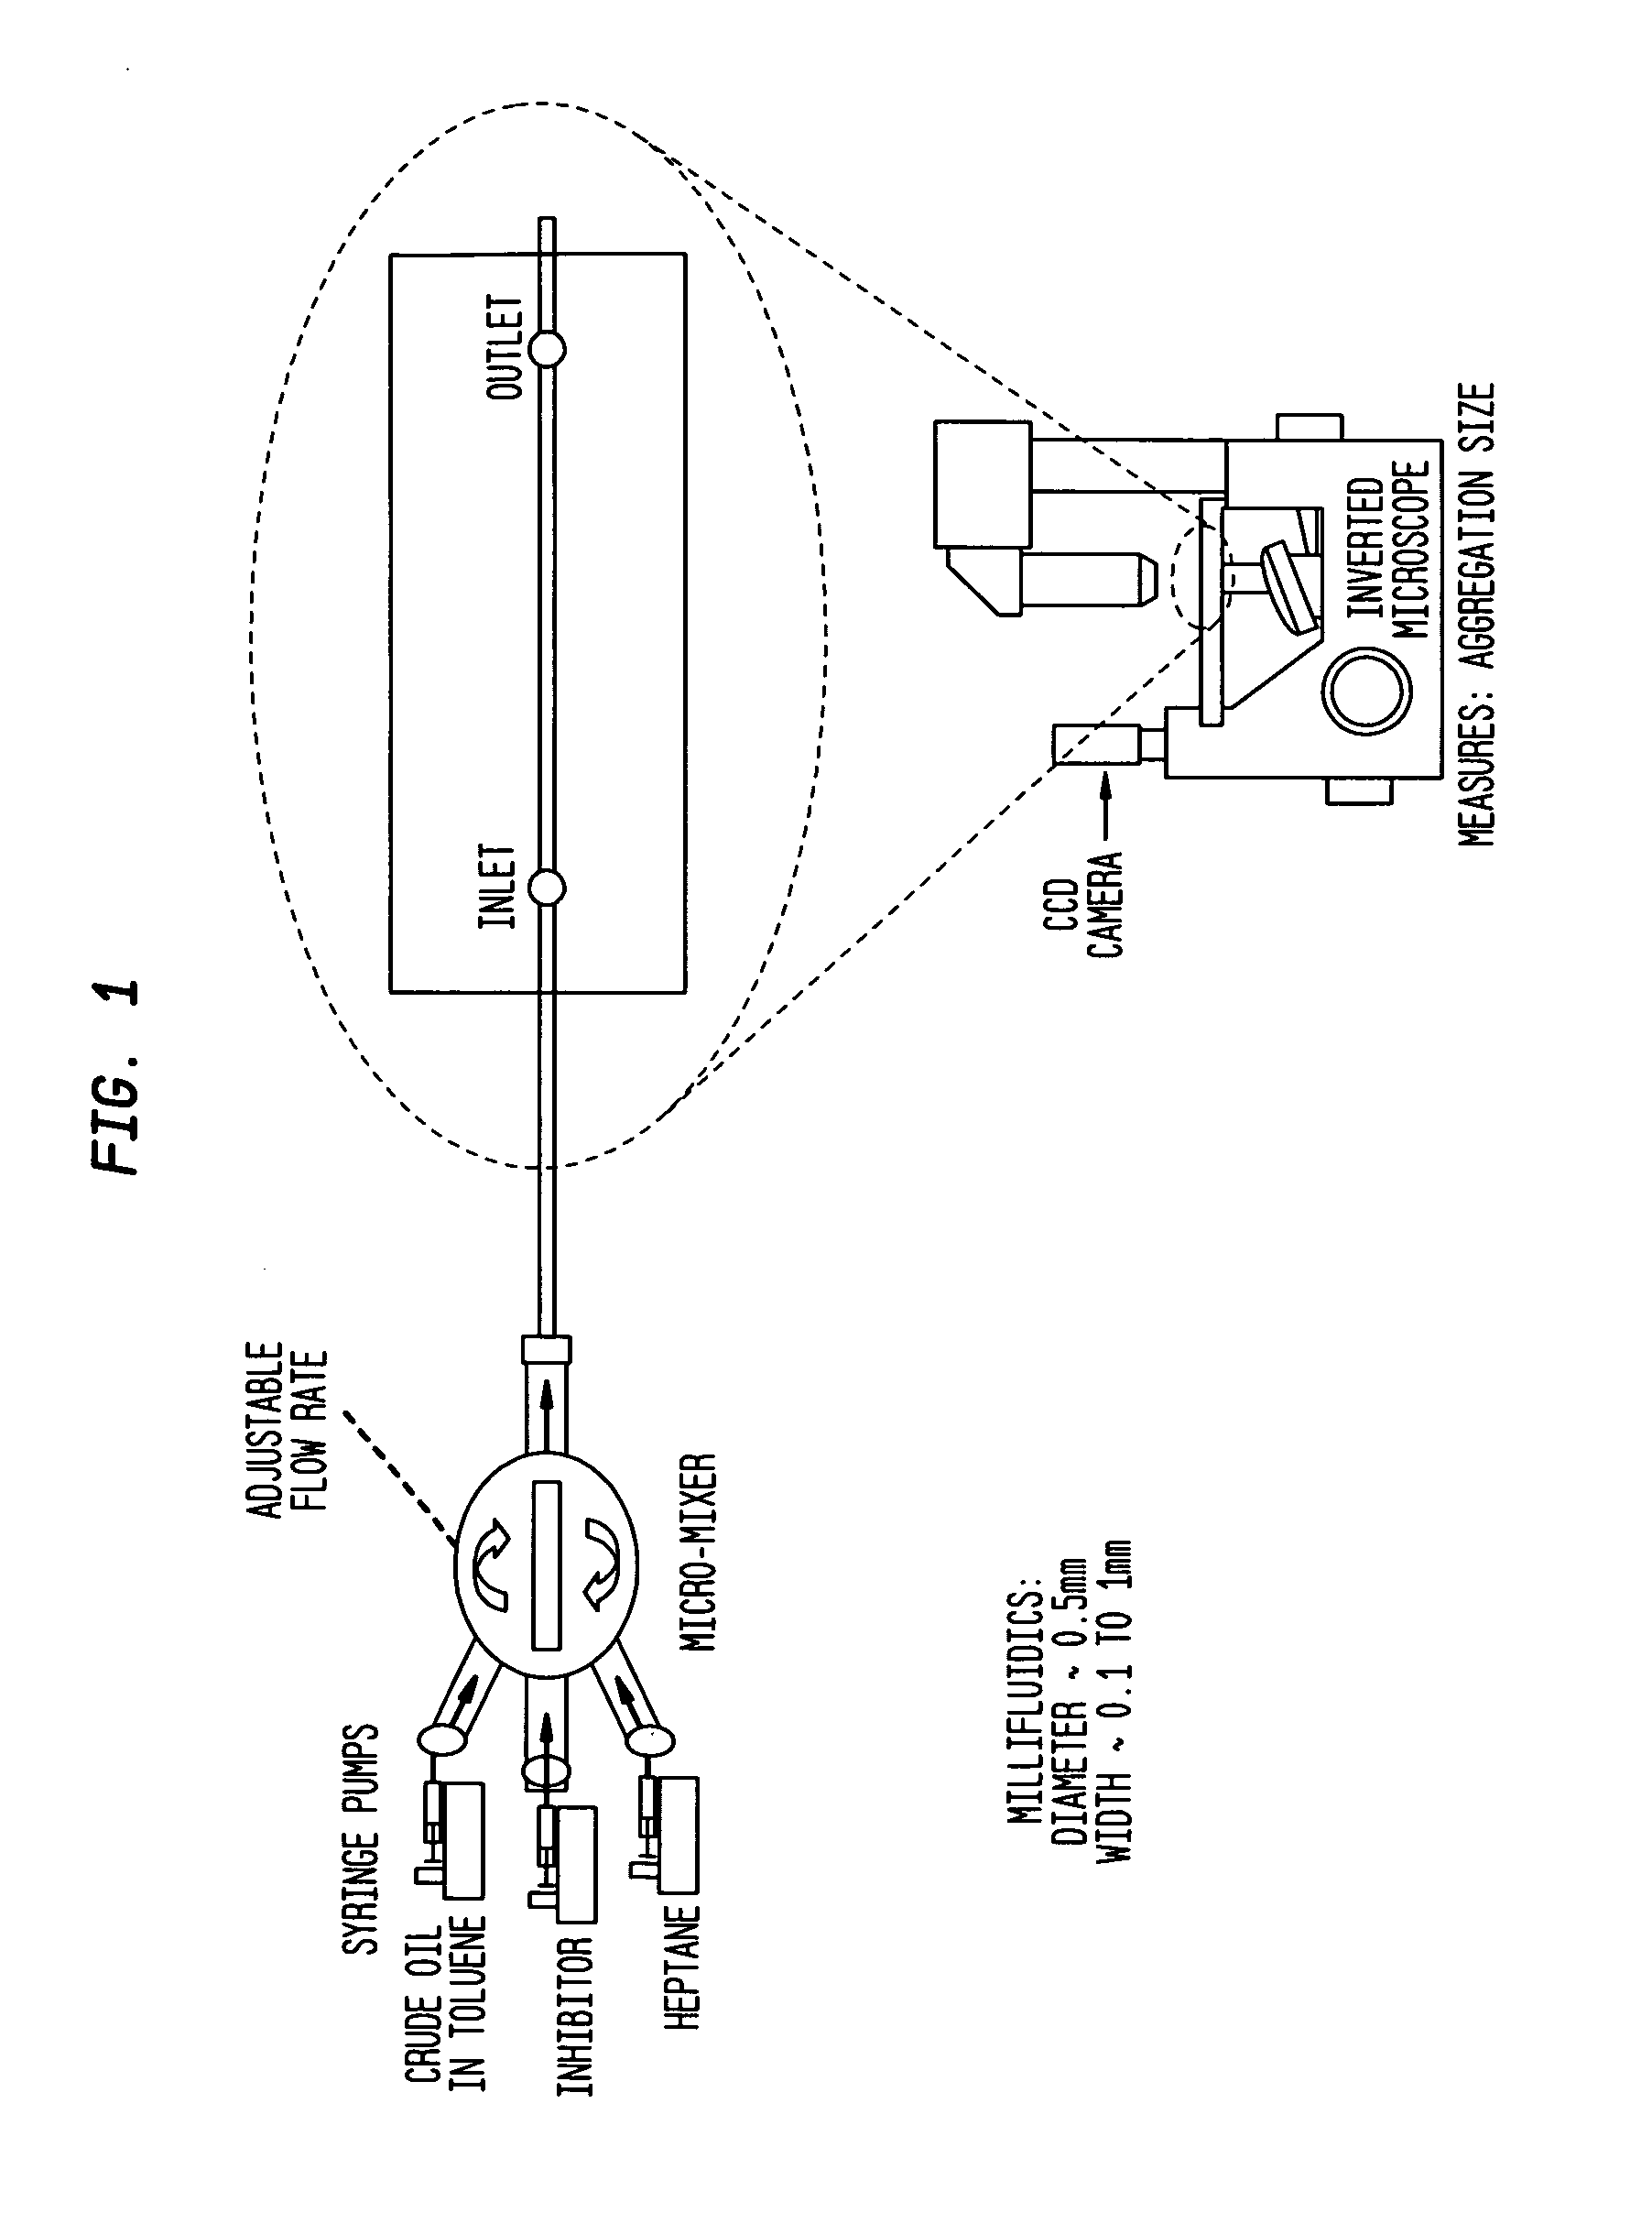 Systems and methods for evaluating asphaltene deposition inhibitors